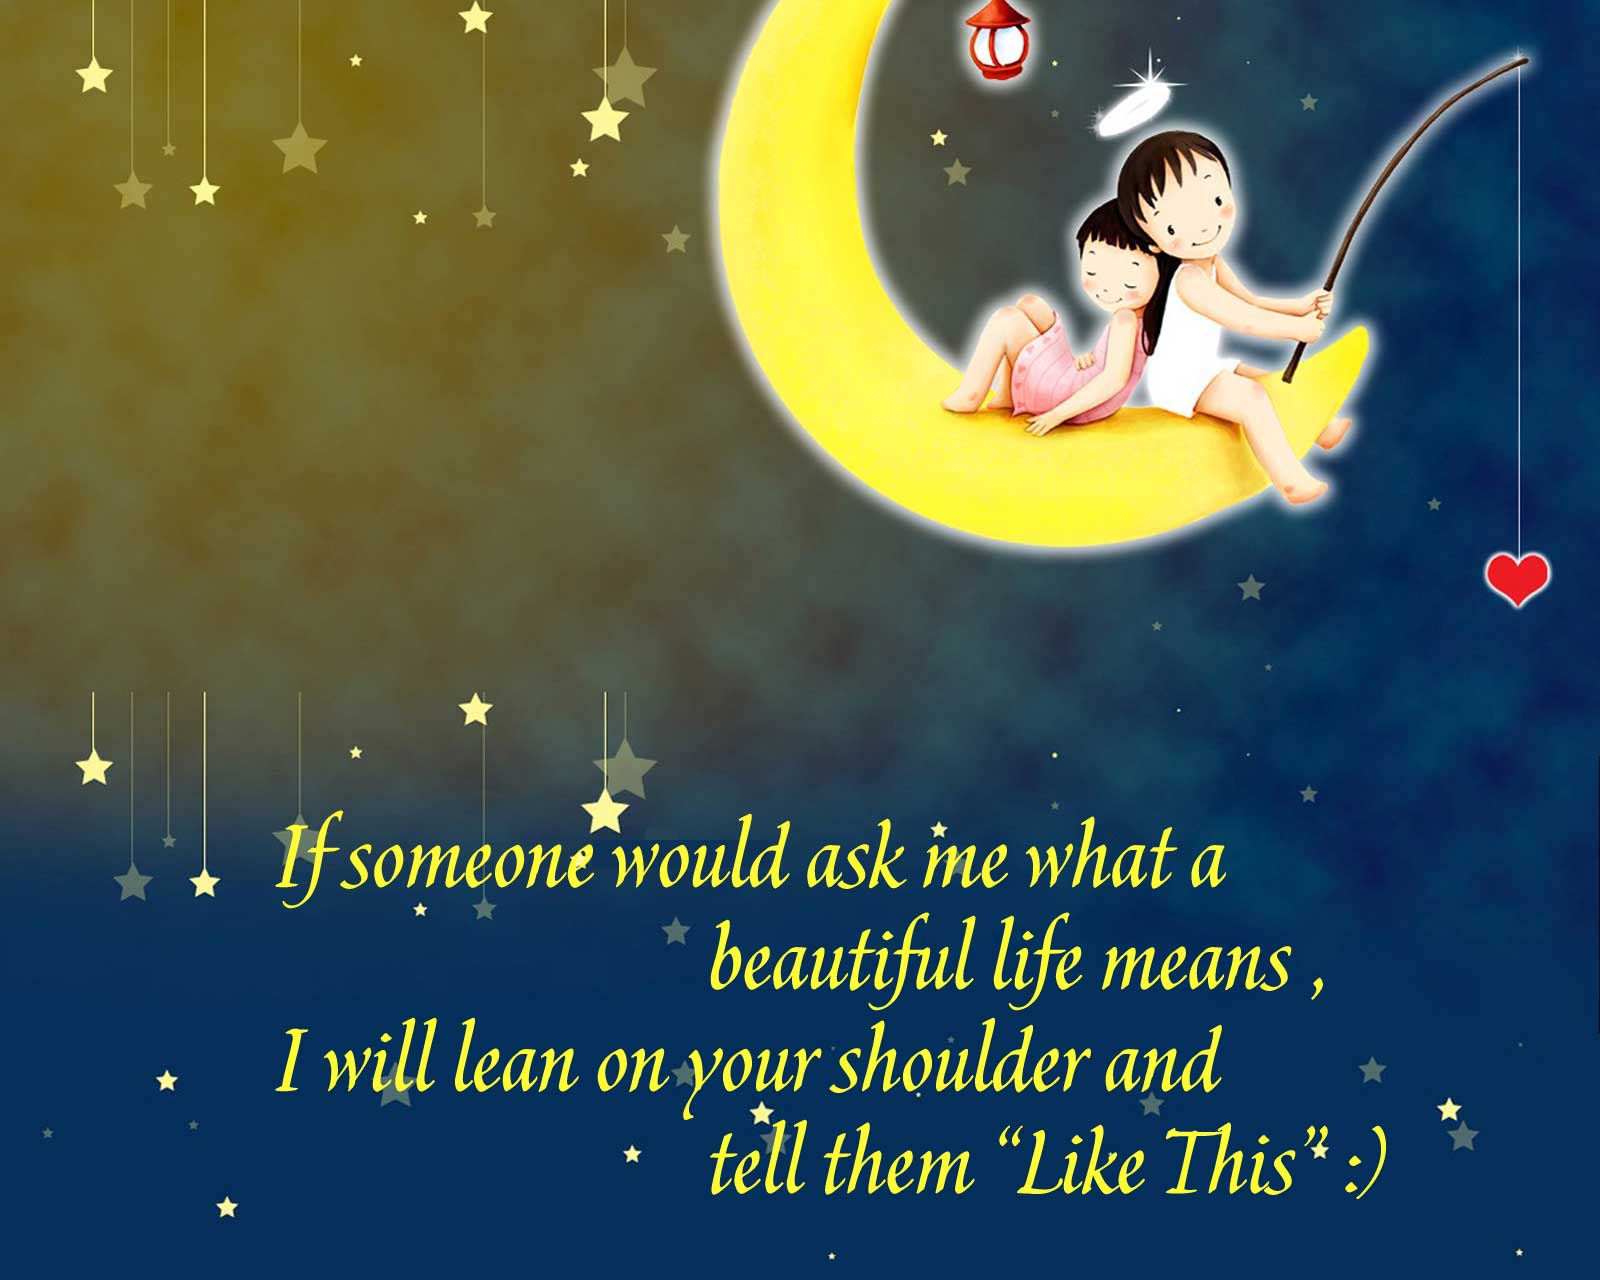 Beautiful Life Means » Love Quotes » Its Me : Khyati